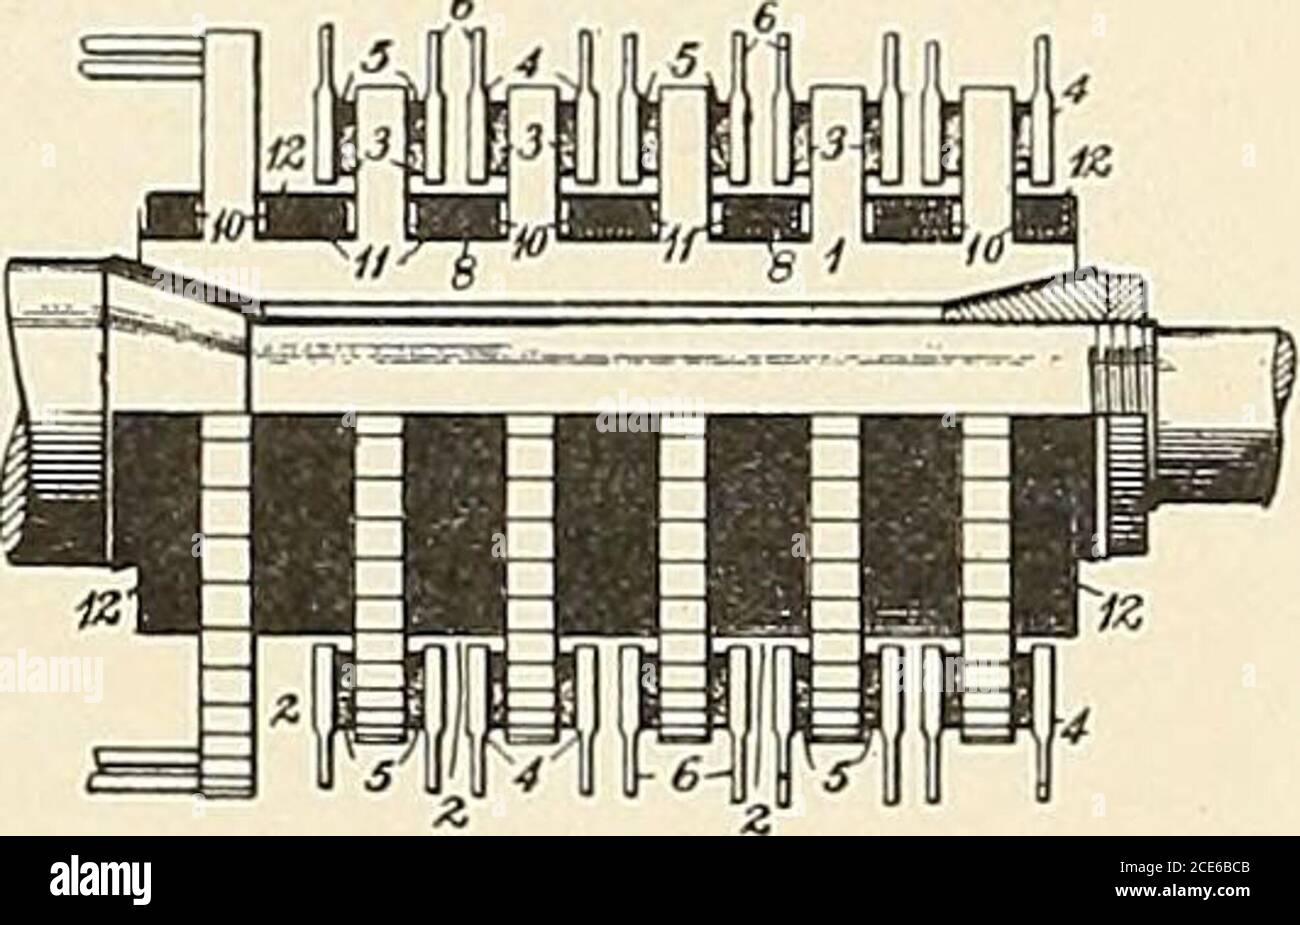 . Journal of electricity, power, and gas . 949,103. Commutator for Dynamo-Electric Machines.Miles Walker, Manchester, England, assignor to WestiughouseElectric & Manufacturing Company. A commutator cylindercomprising insulated commutator bars and Iraving a series of. relatively deep peripheral gTooves the side walls of whichconstitute plane contact surfaces, and clamping bands locatedin the bottoms of said grooves to hold the commutator barsagainst displacement. 949,184. Insulator for High-Potential Circuits. .Joseph N.Kelman, Los Angeles, Cal. An insulator consisting of a plu-rality of spread Stock Photo